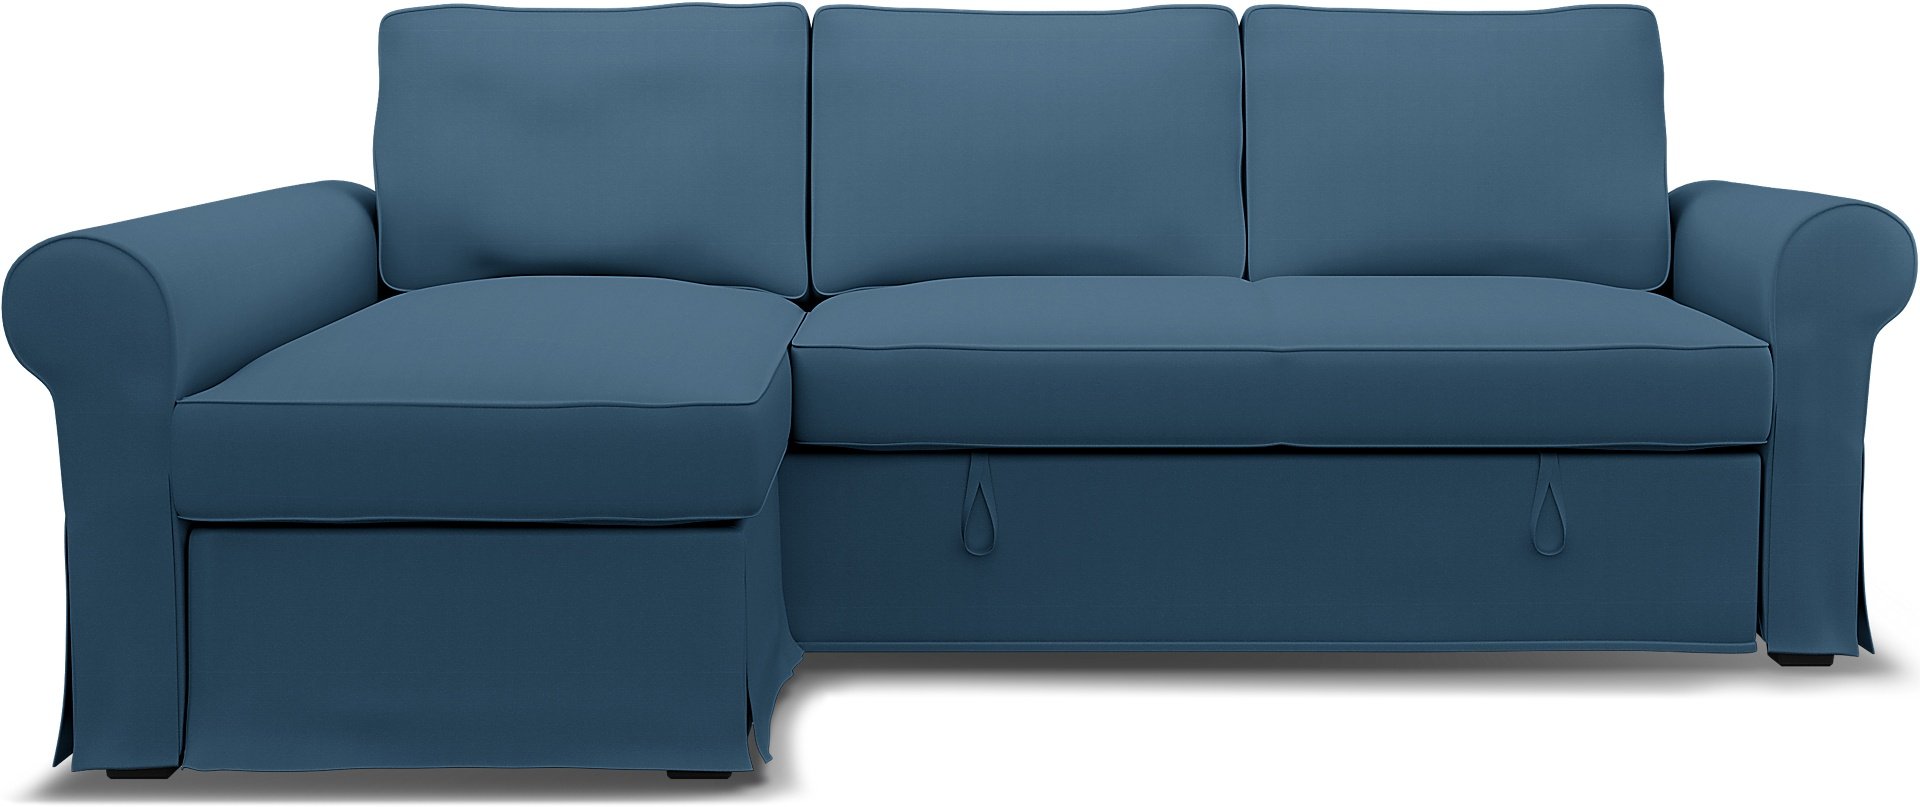 IKEA - Backabro Sofabed with Chaise Cover, Real Teal, Cotton - Bemz